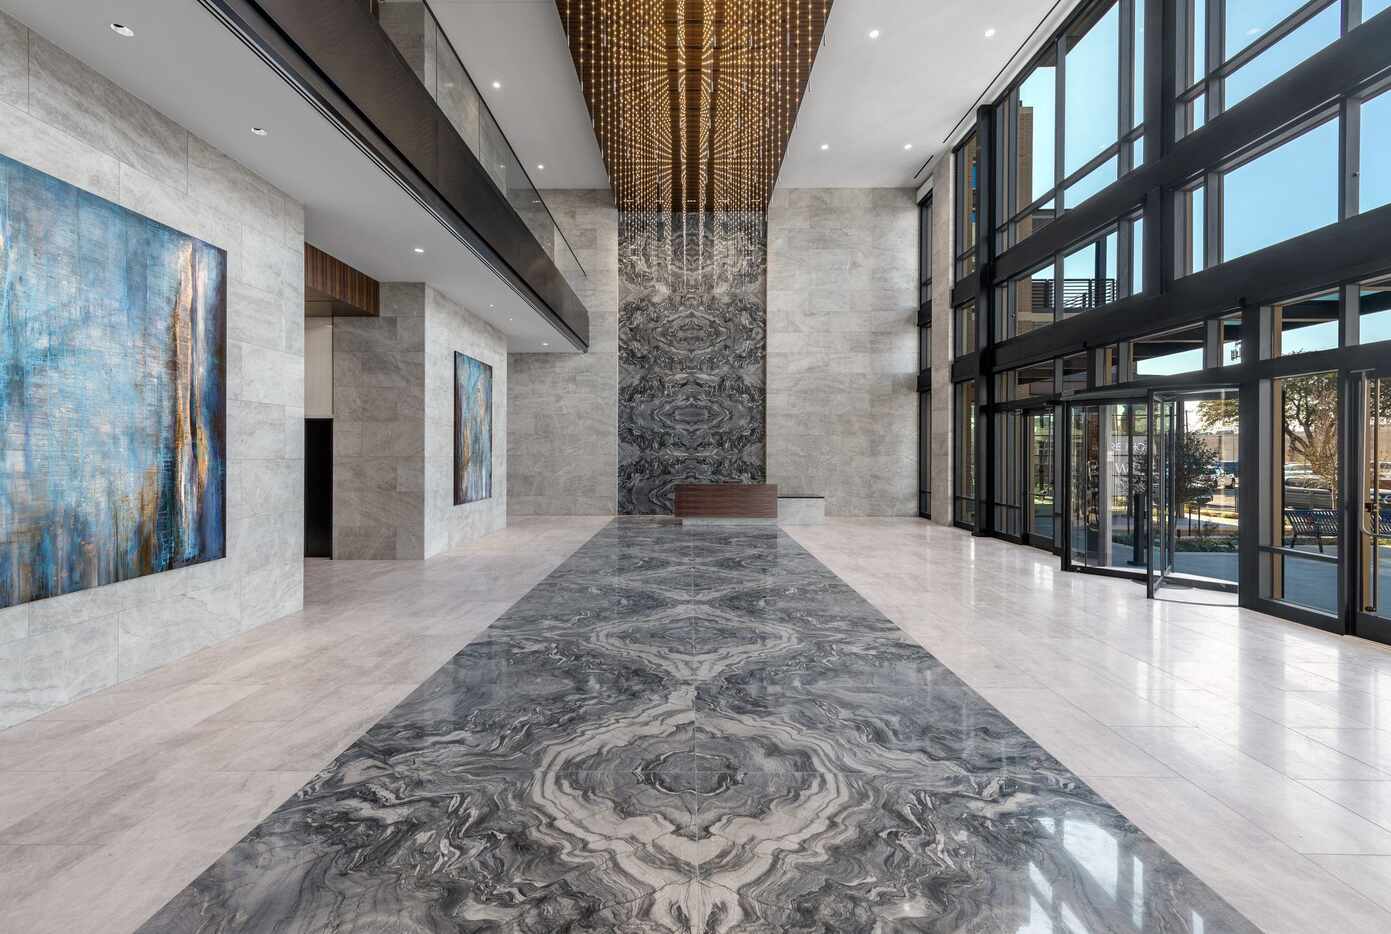 The lobby of the new Weir's Plaza toer on Knox Street has polished stone from South America.